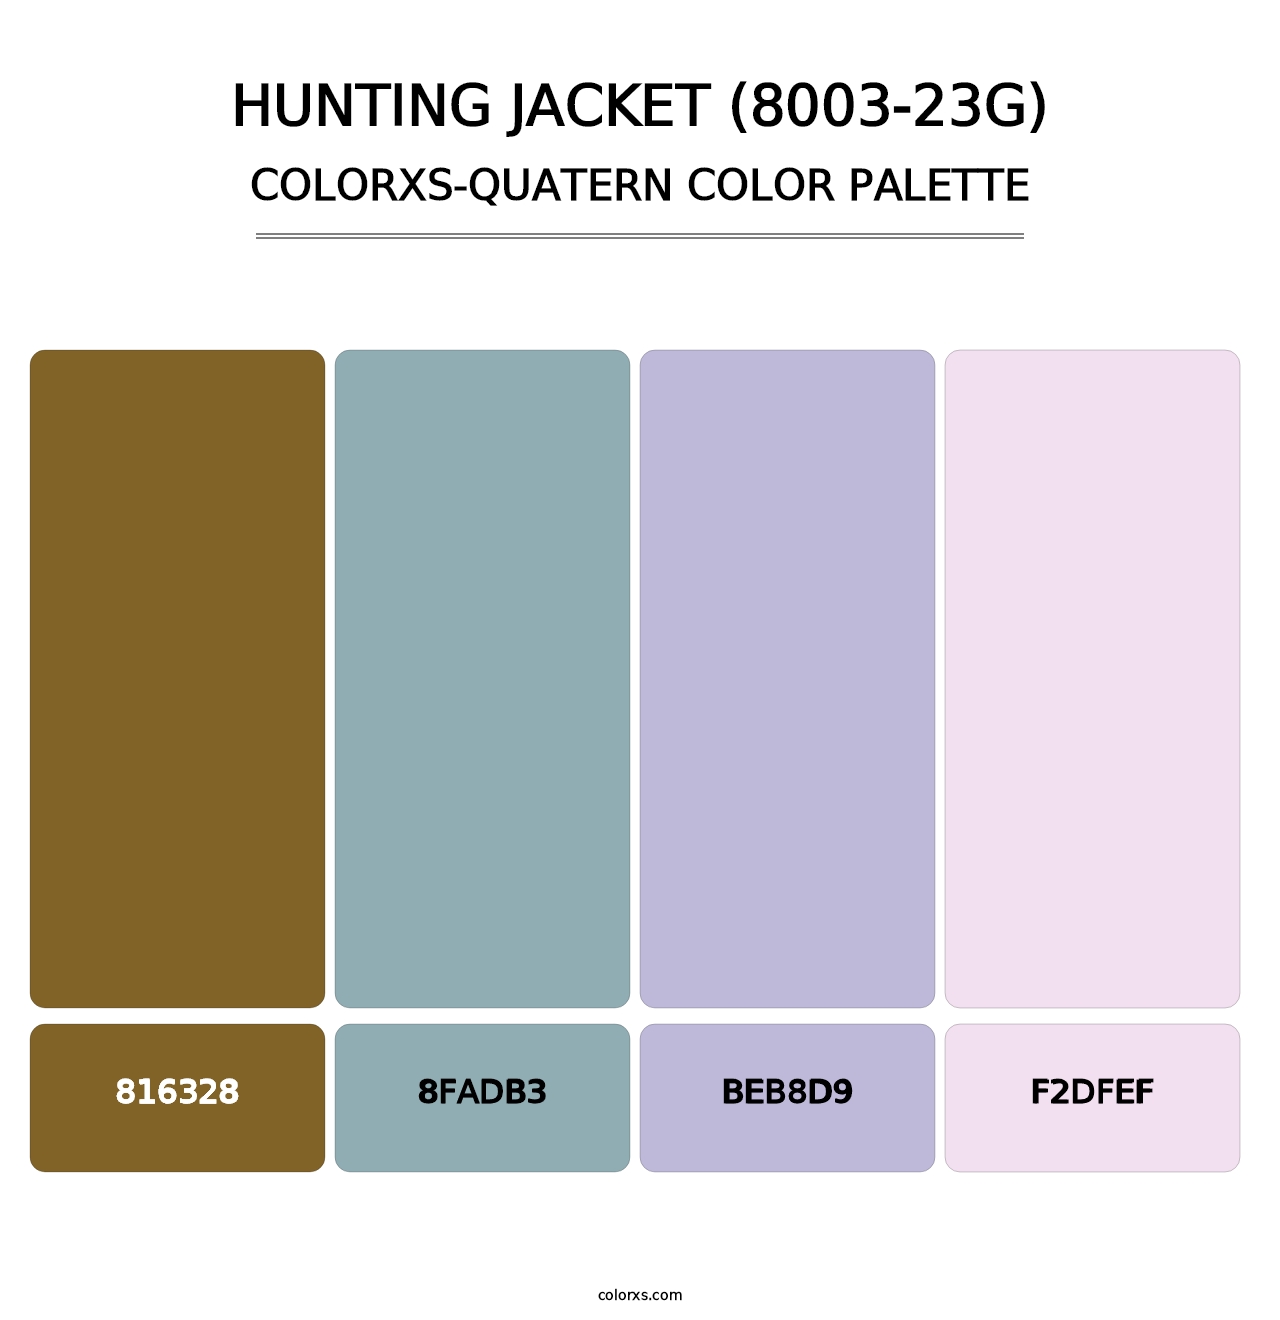 Hunting Jacket (8003-23G) - Colorxs Quatern Palette